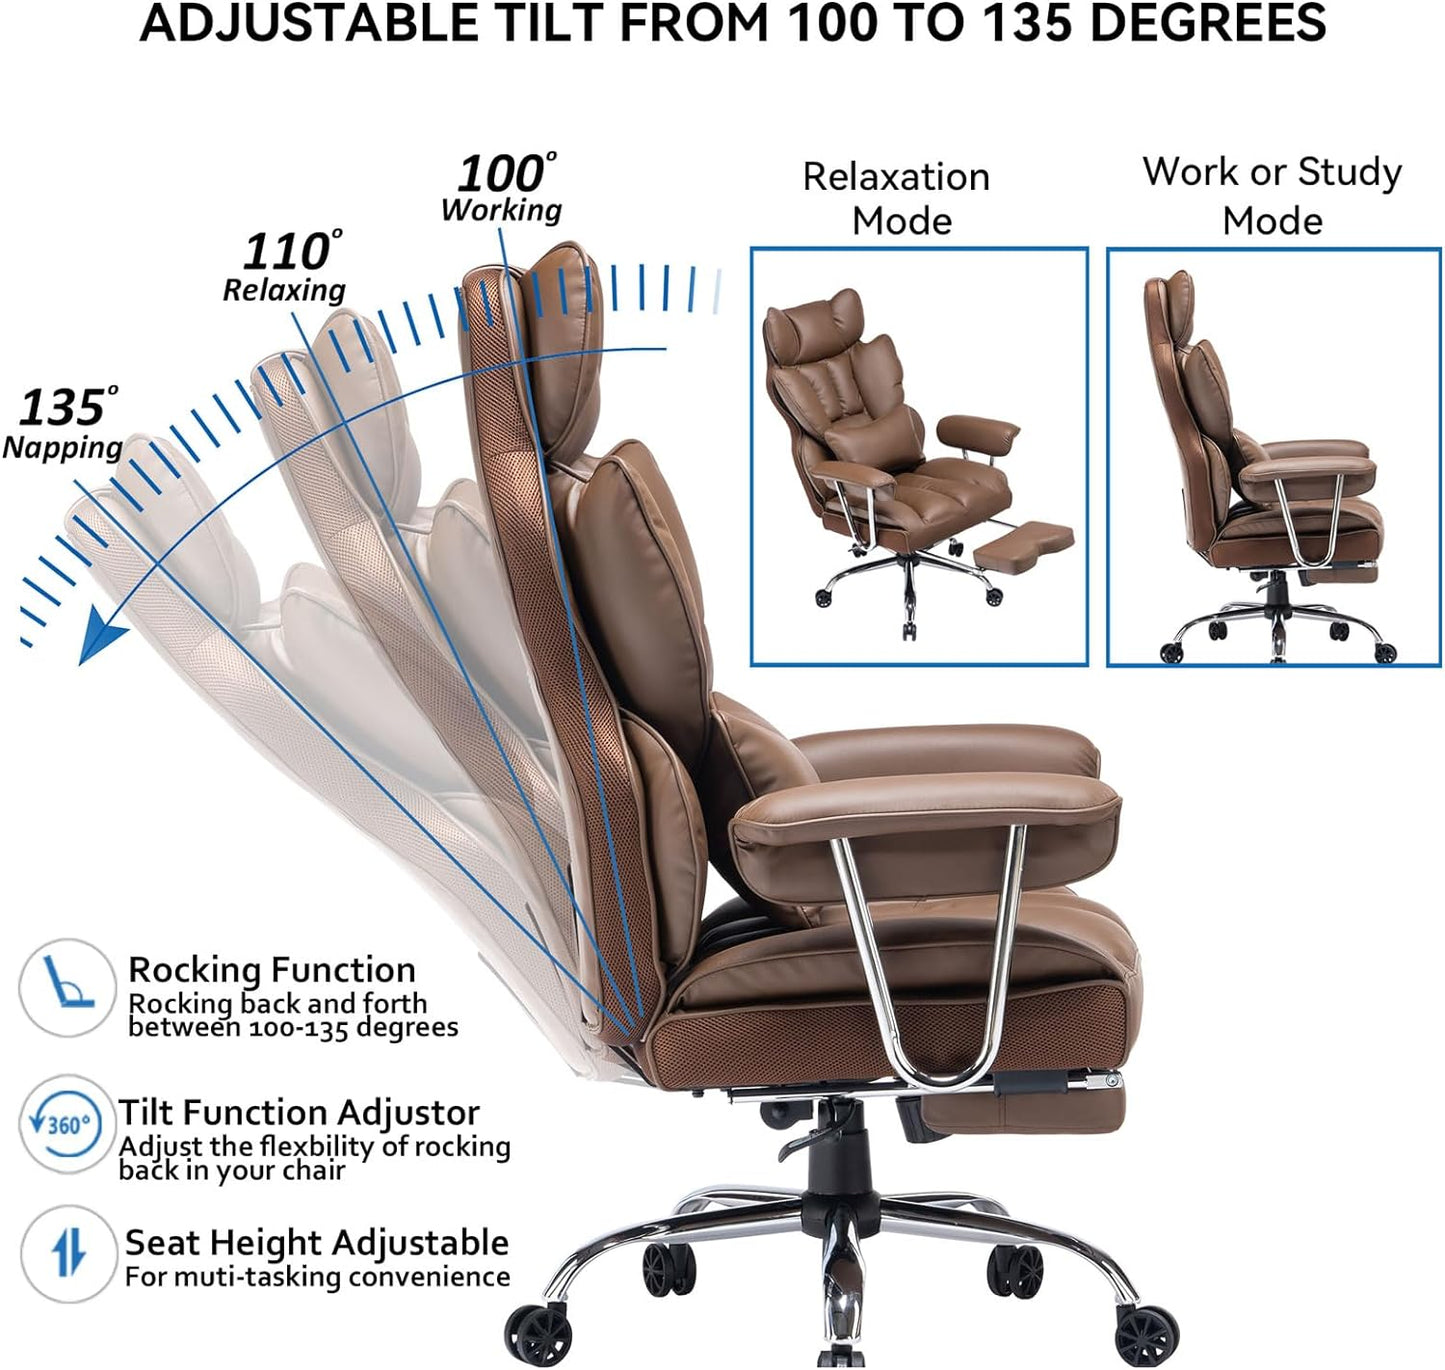 Desk Office Chair 400LBS, High Back Office Chair,PU Leather Office Chair, Executive Office Chair, Reclining Office Chair, Brown Office Chair with Lumbar Support and Leg Rest